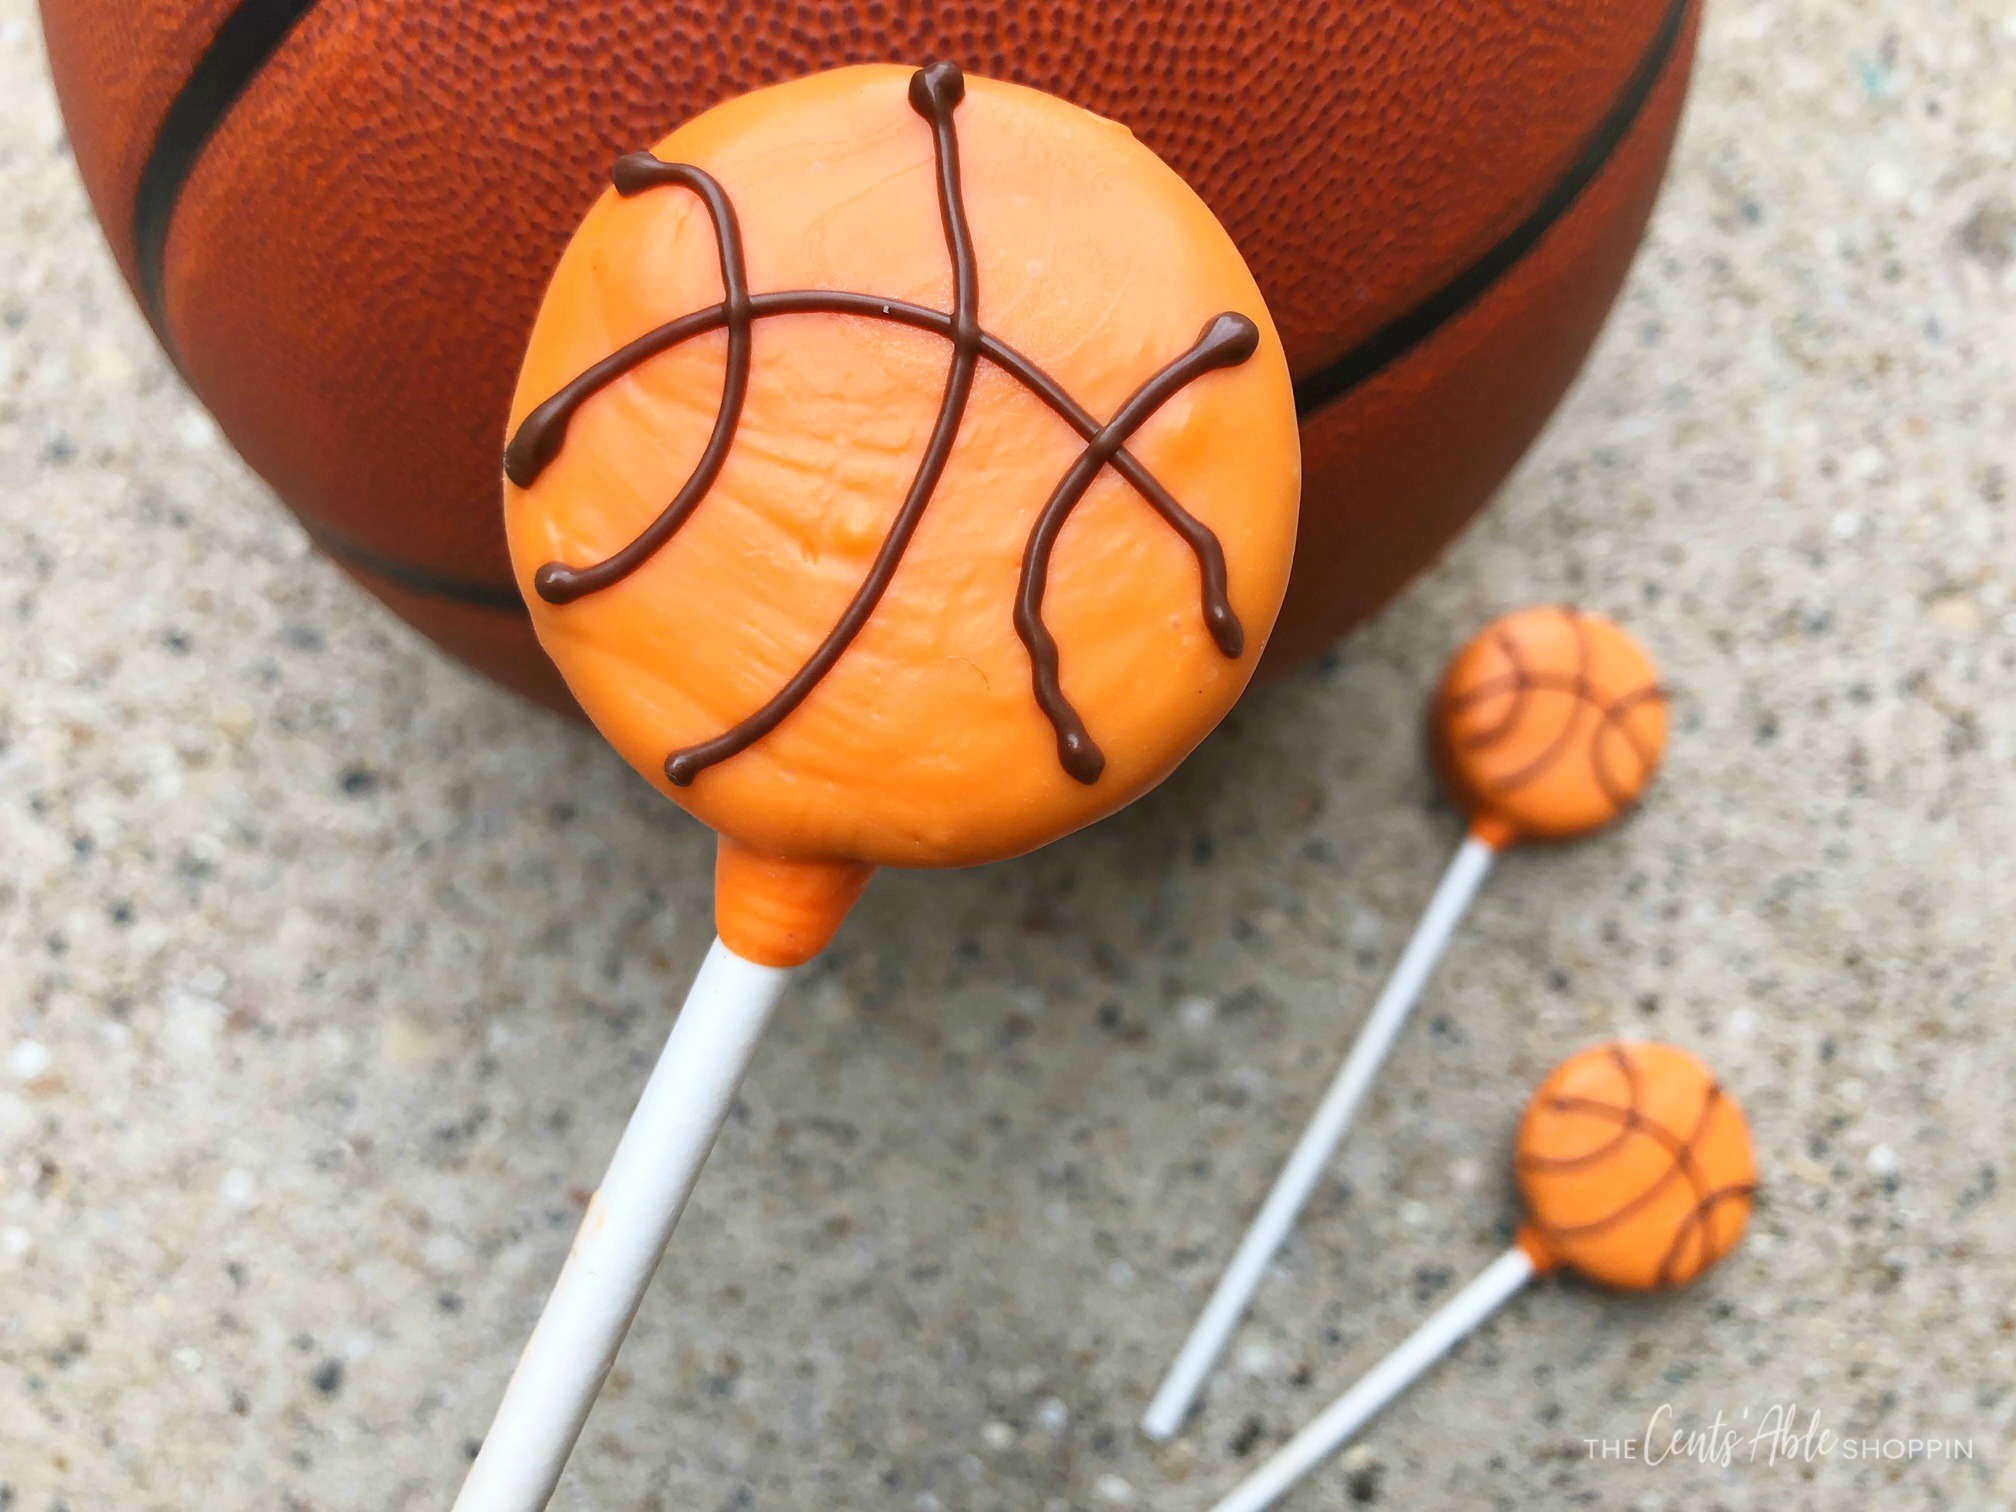 Yummy Basketball Oreo Pops - the perfect way to celebrate a successful season or a delicious treat to serve at game time!